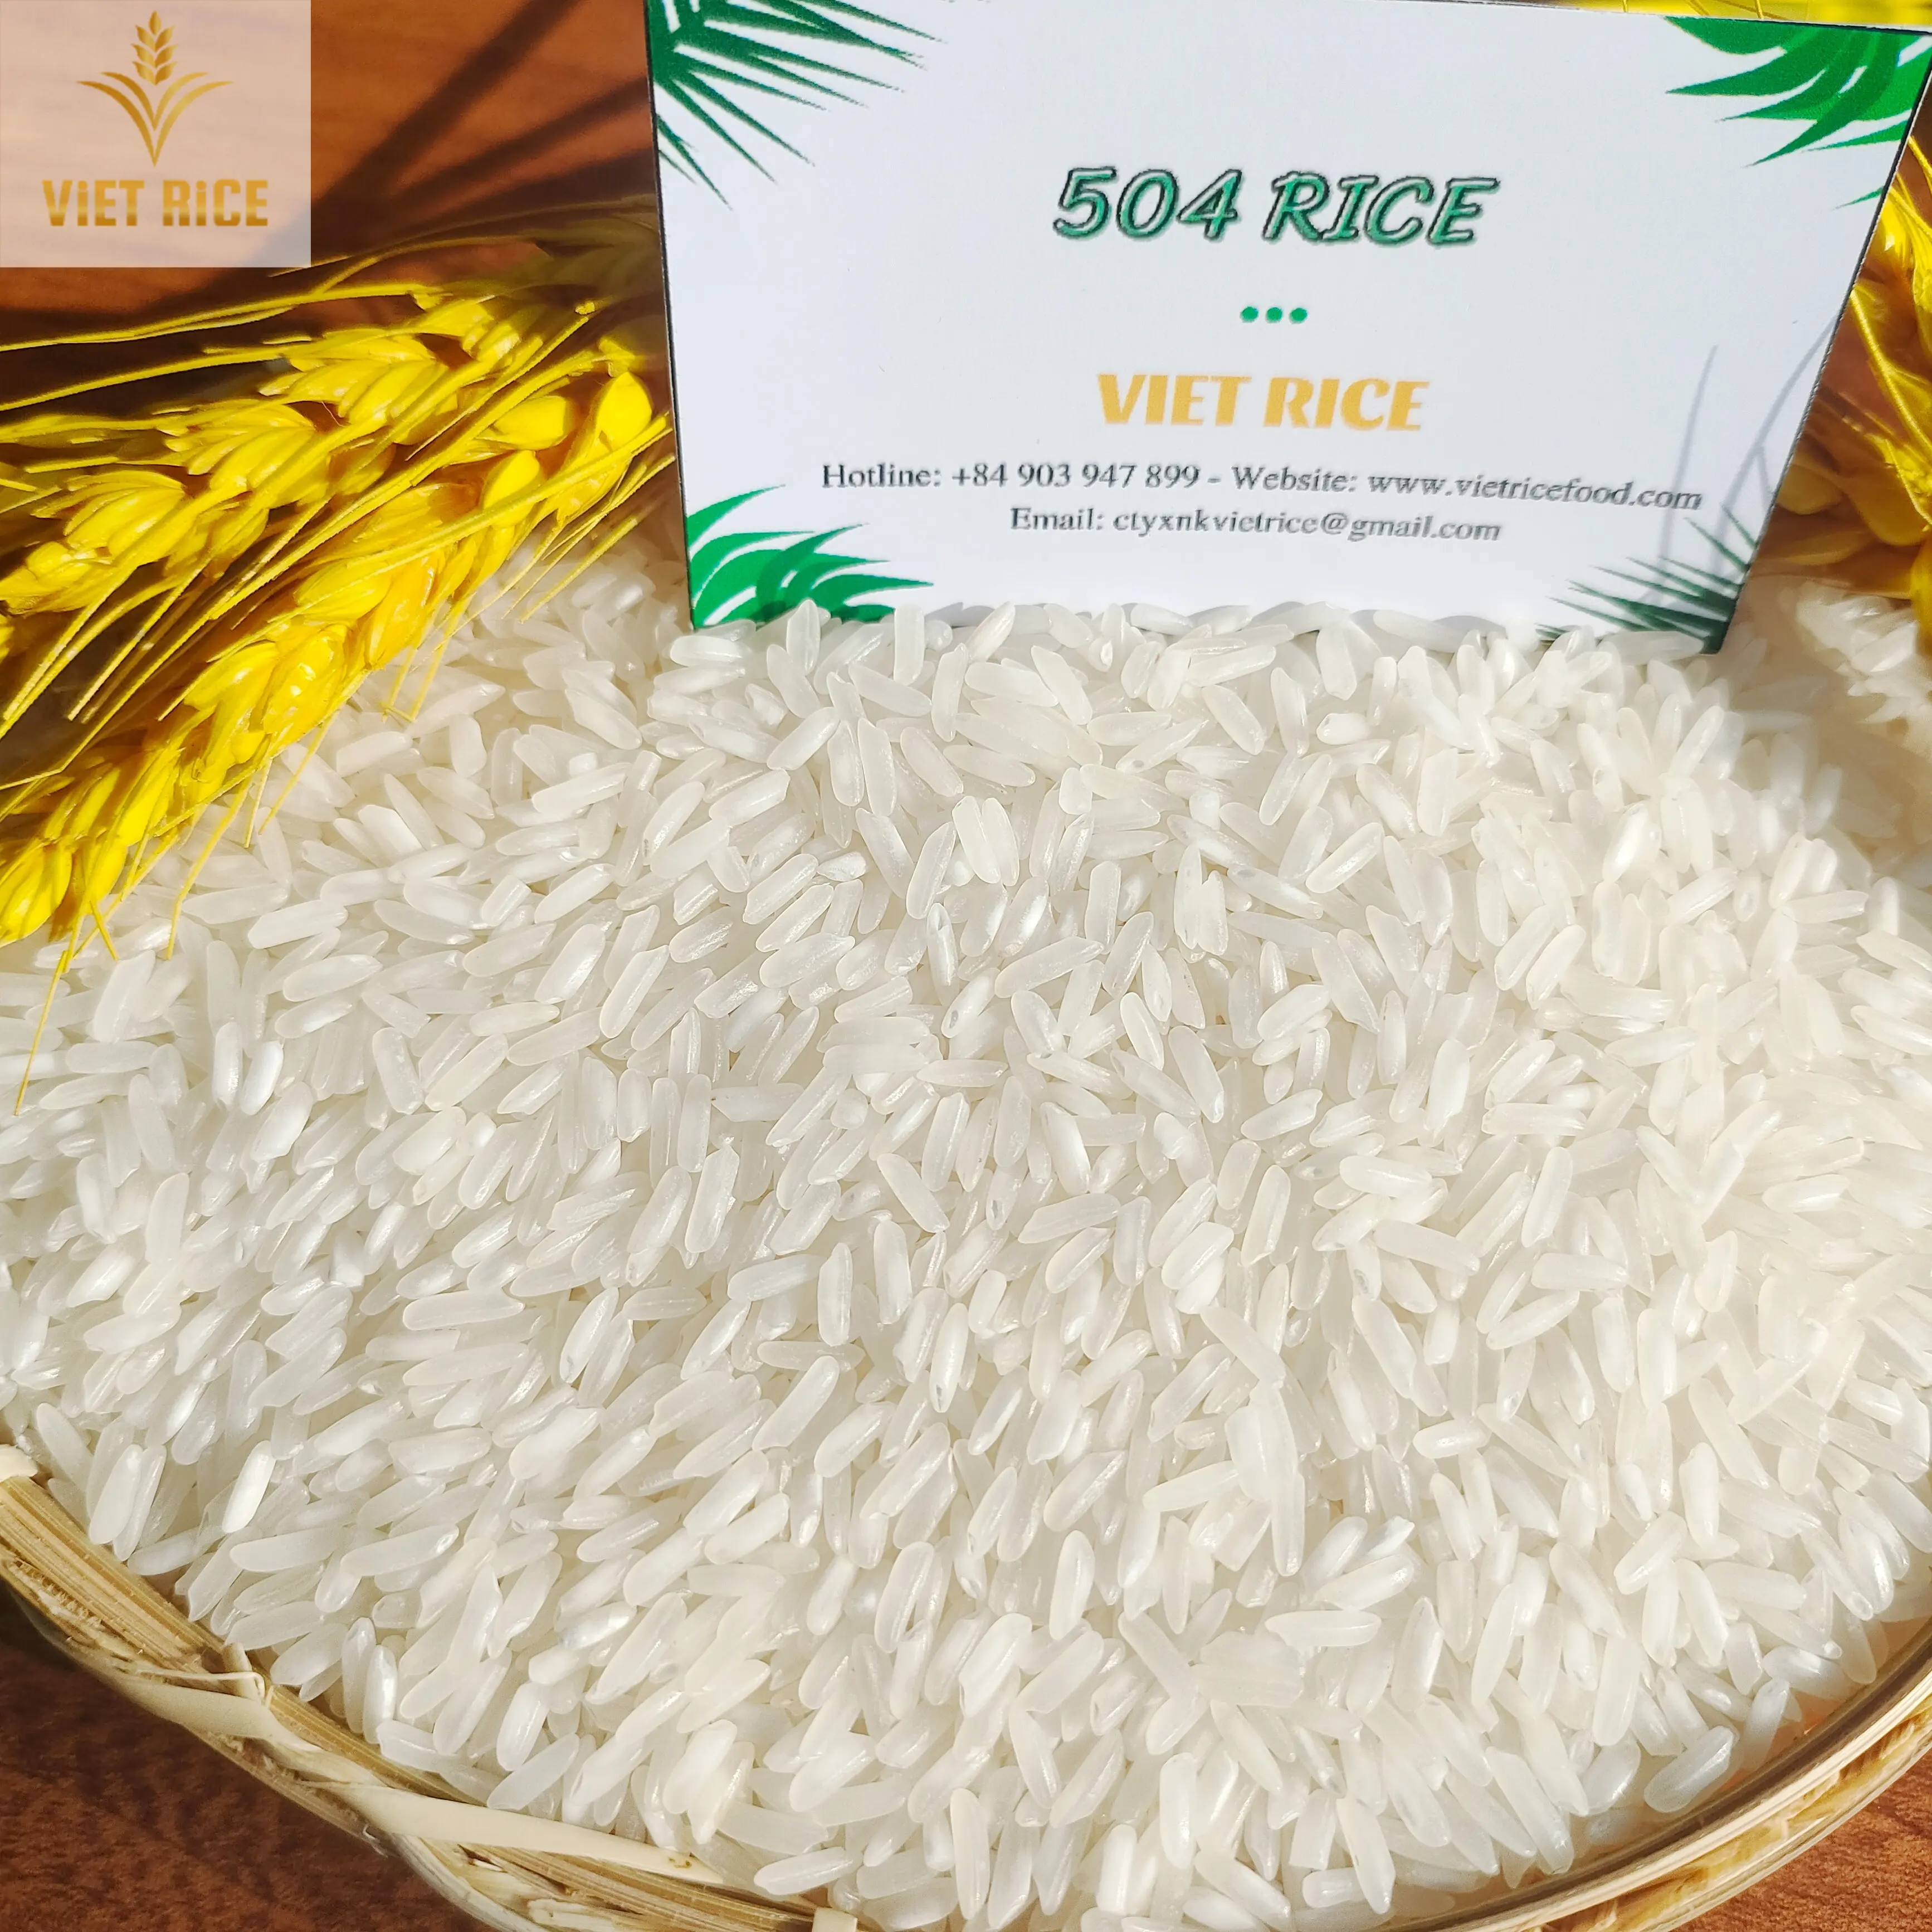 IR504 5% broken fragrant rice premium quality, large quantity and competitive price rice from VIETRICE international standard